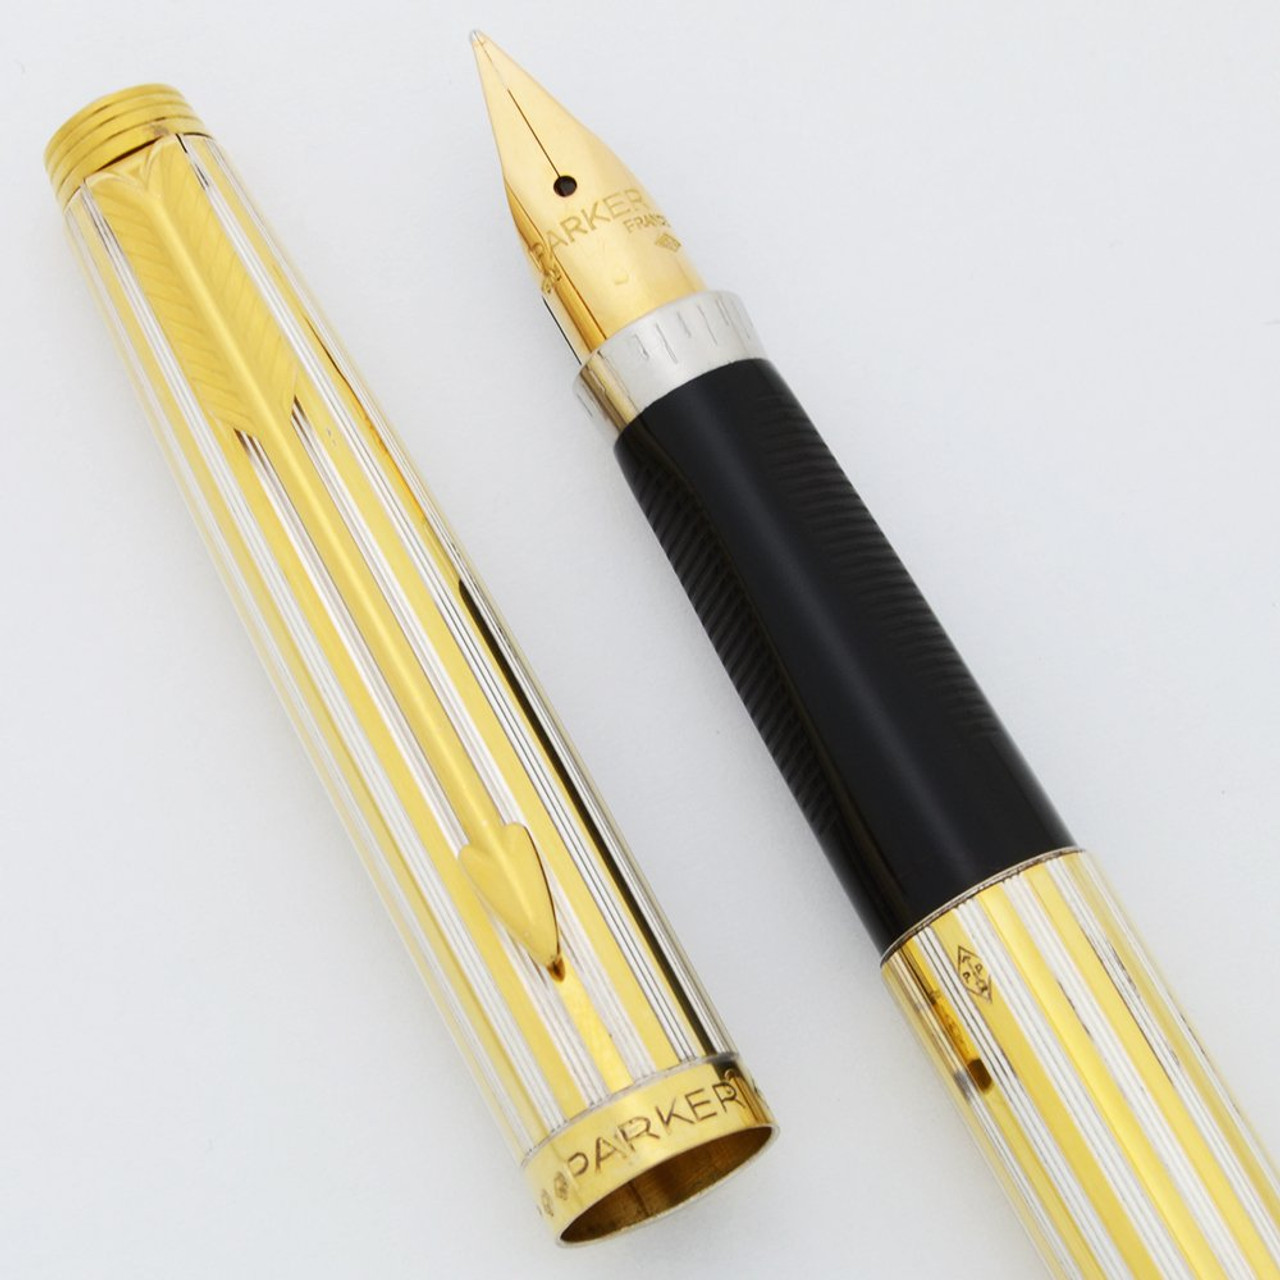 Parker 75 Custom Fountain Pen (1983) - Uncommon "Florence" Vermeil and Sterling Silver Stripes, Medium 18k Nib (Excellent +, Works Well)